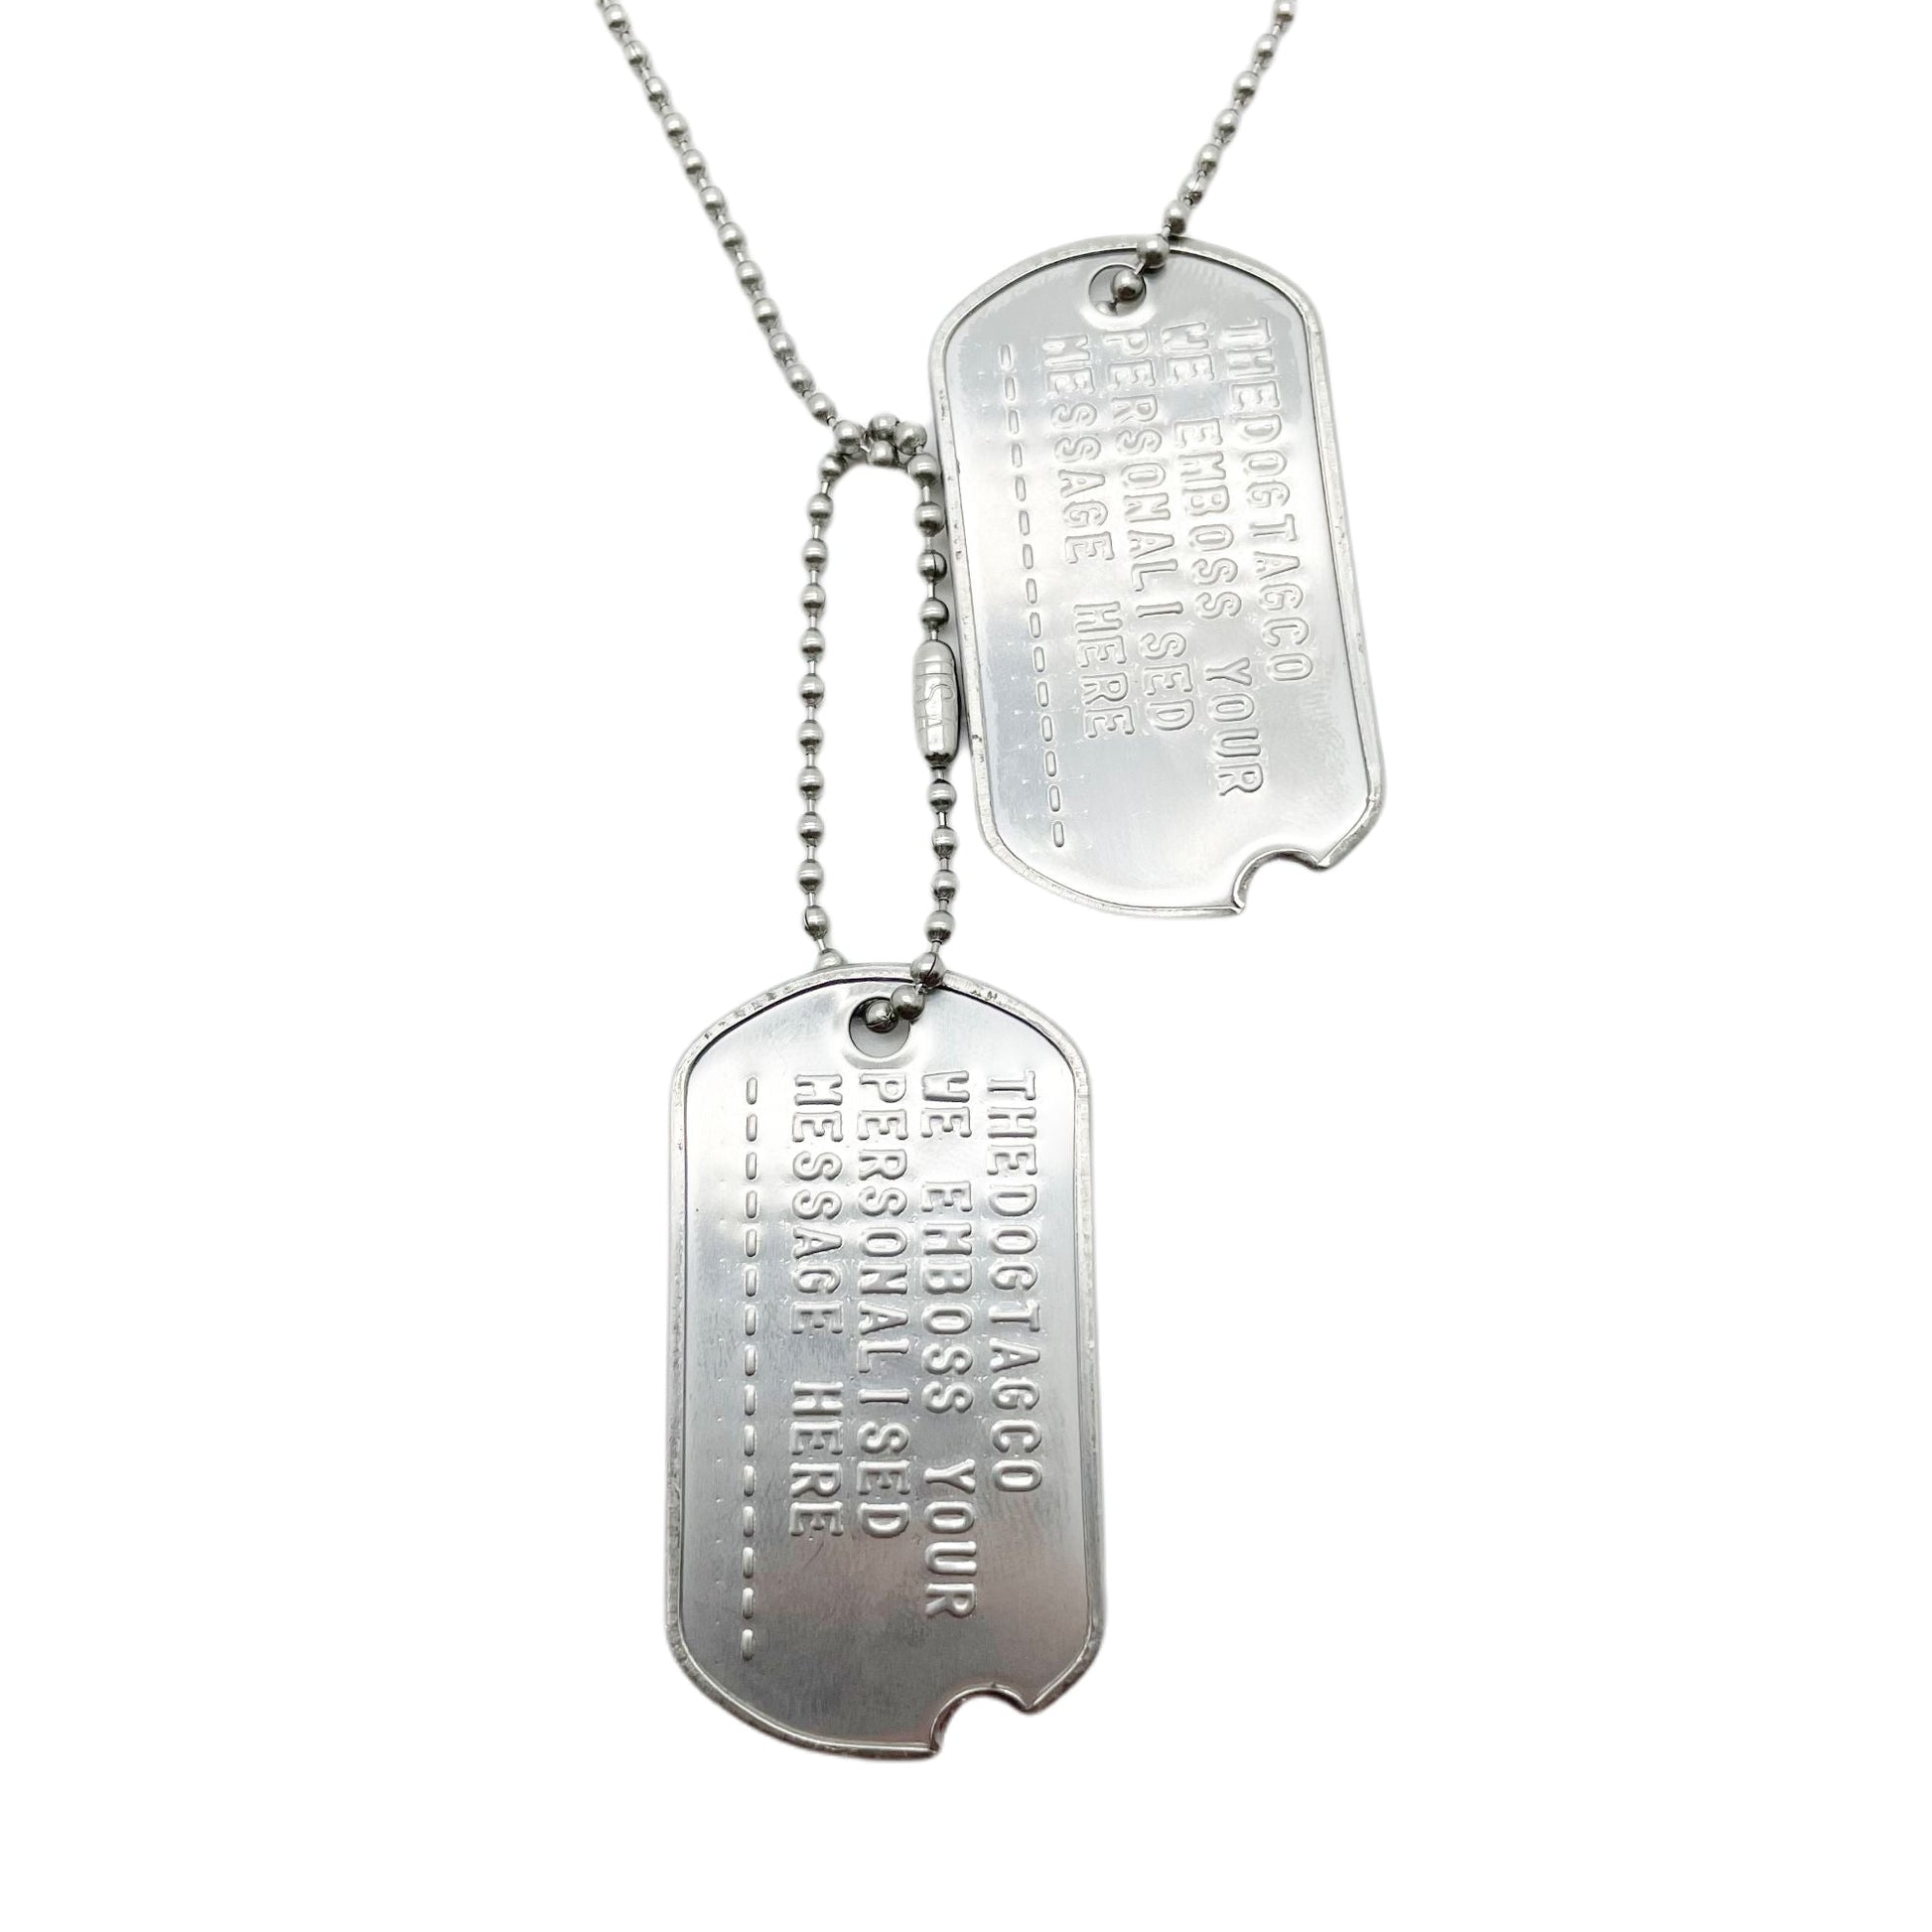 Authentic Personalised US Military Embossed Stainless Steel Dog Tags Pair Set - WW2 - pre 1965 Exact Replica - TheDogTagCo